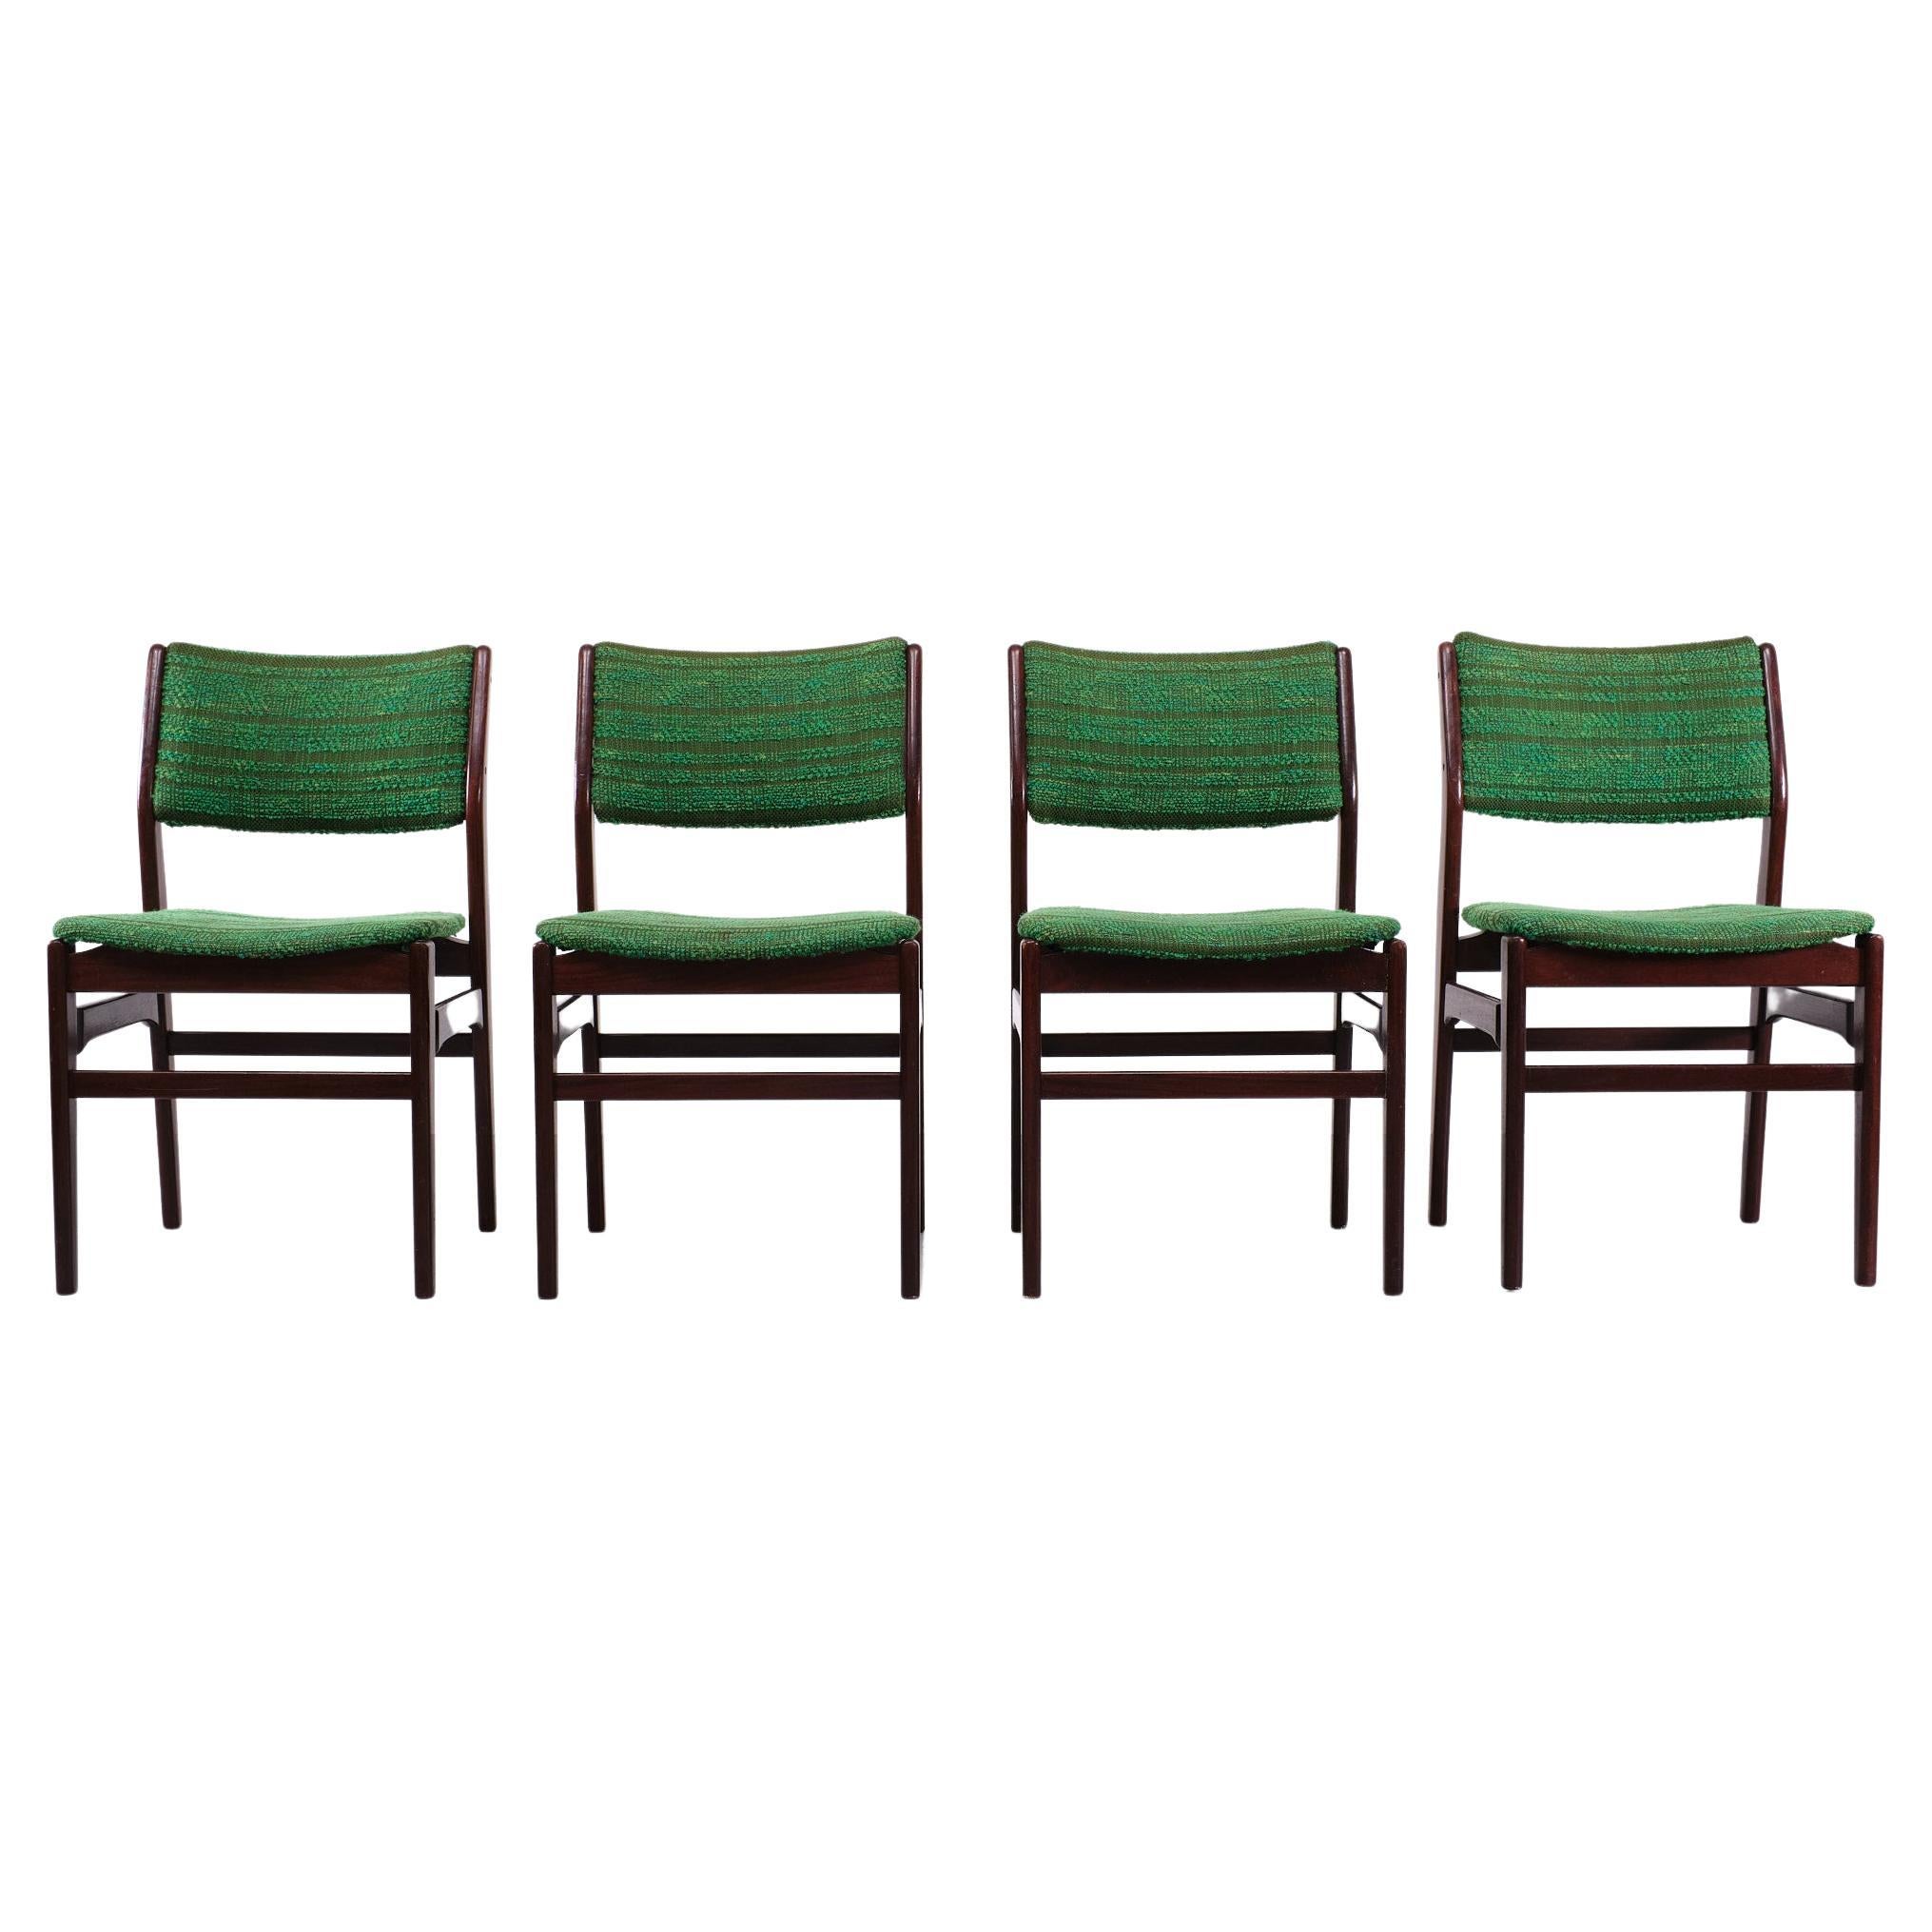 Very nice set of 4 dining chairs . Solid Rosewood frame ,comes with its 
original Green upholstery . Typical 1960s . Good vintage condition